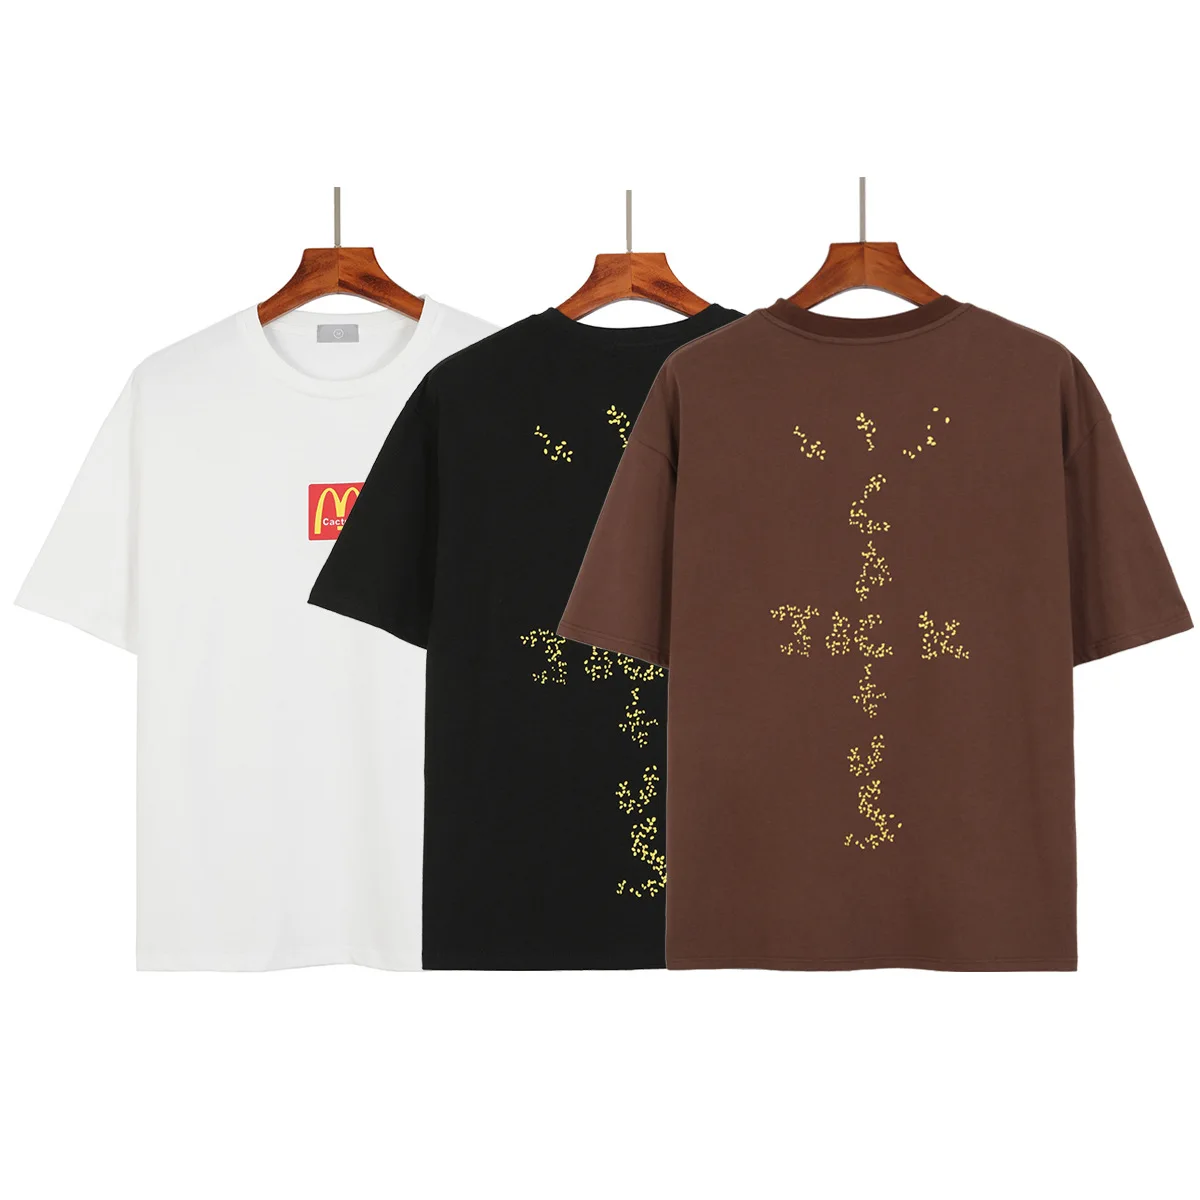 

Travis Scott Cactus Jack Co-branded TS Short Sleeve Loose T-shirt Meichao Overalls Couple High Street Casual Cotton MEN Tees